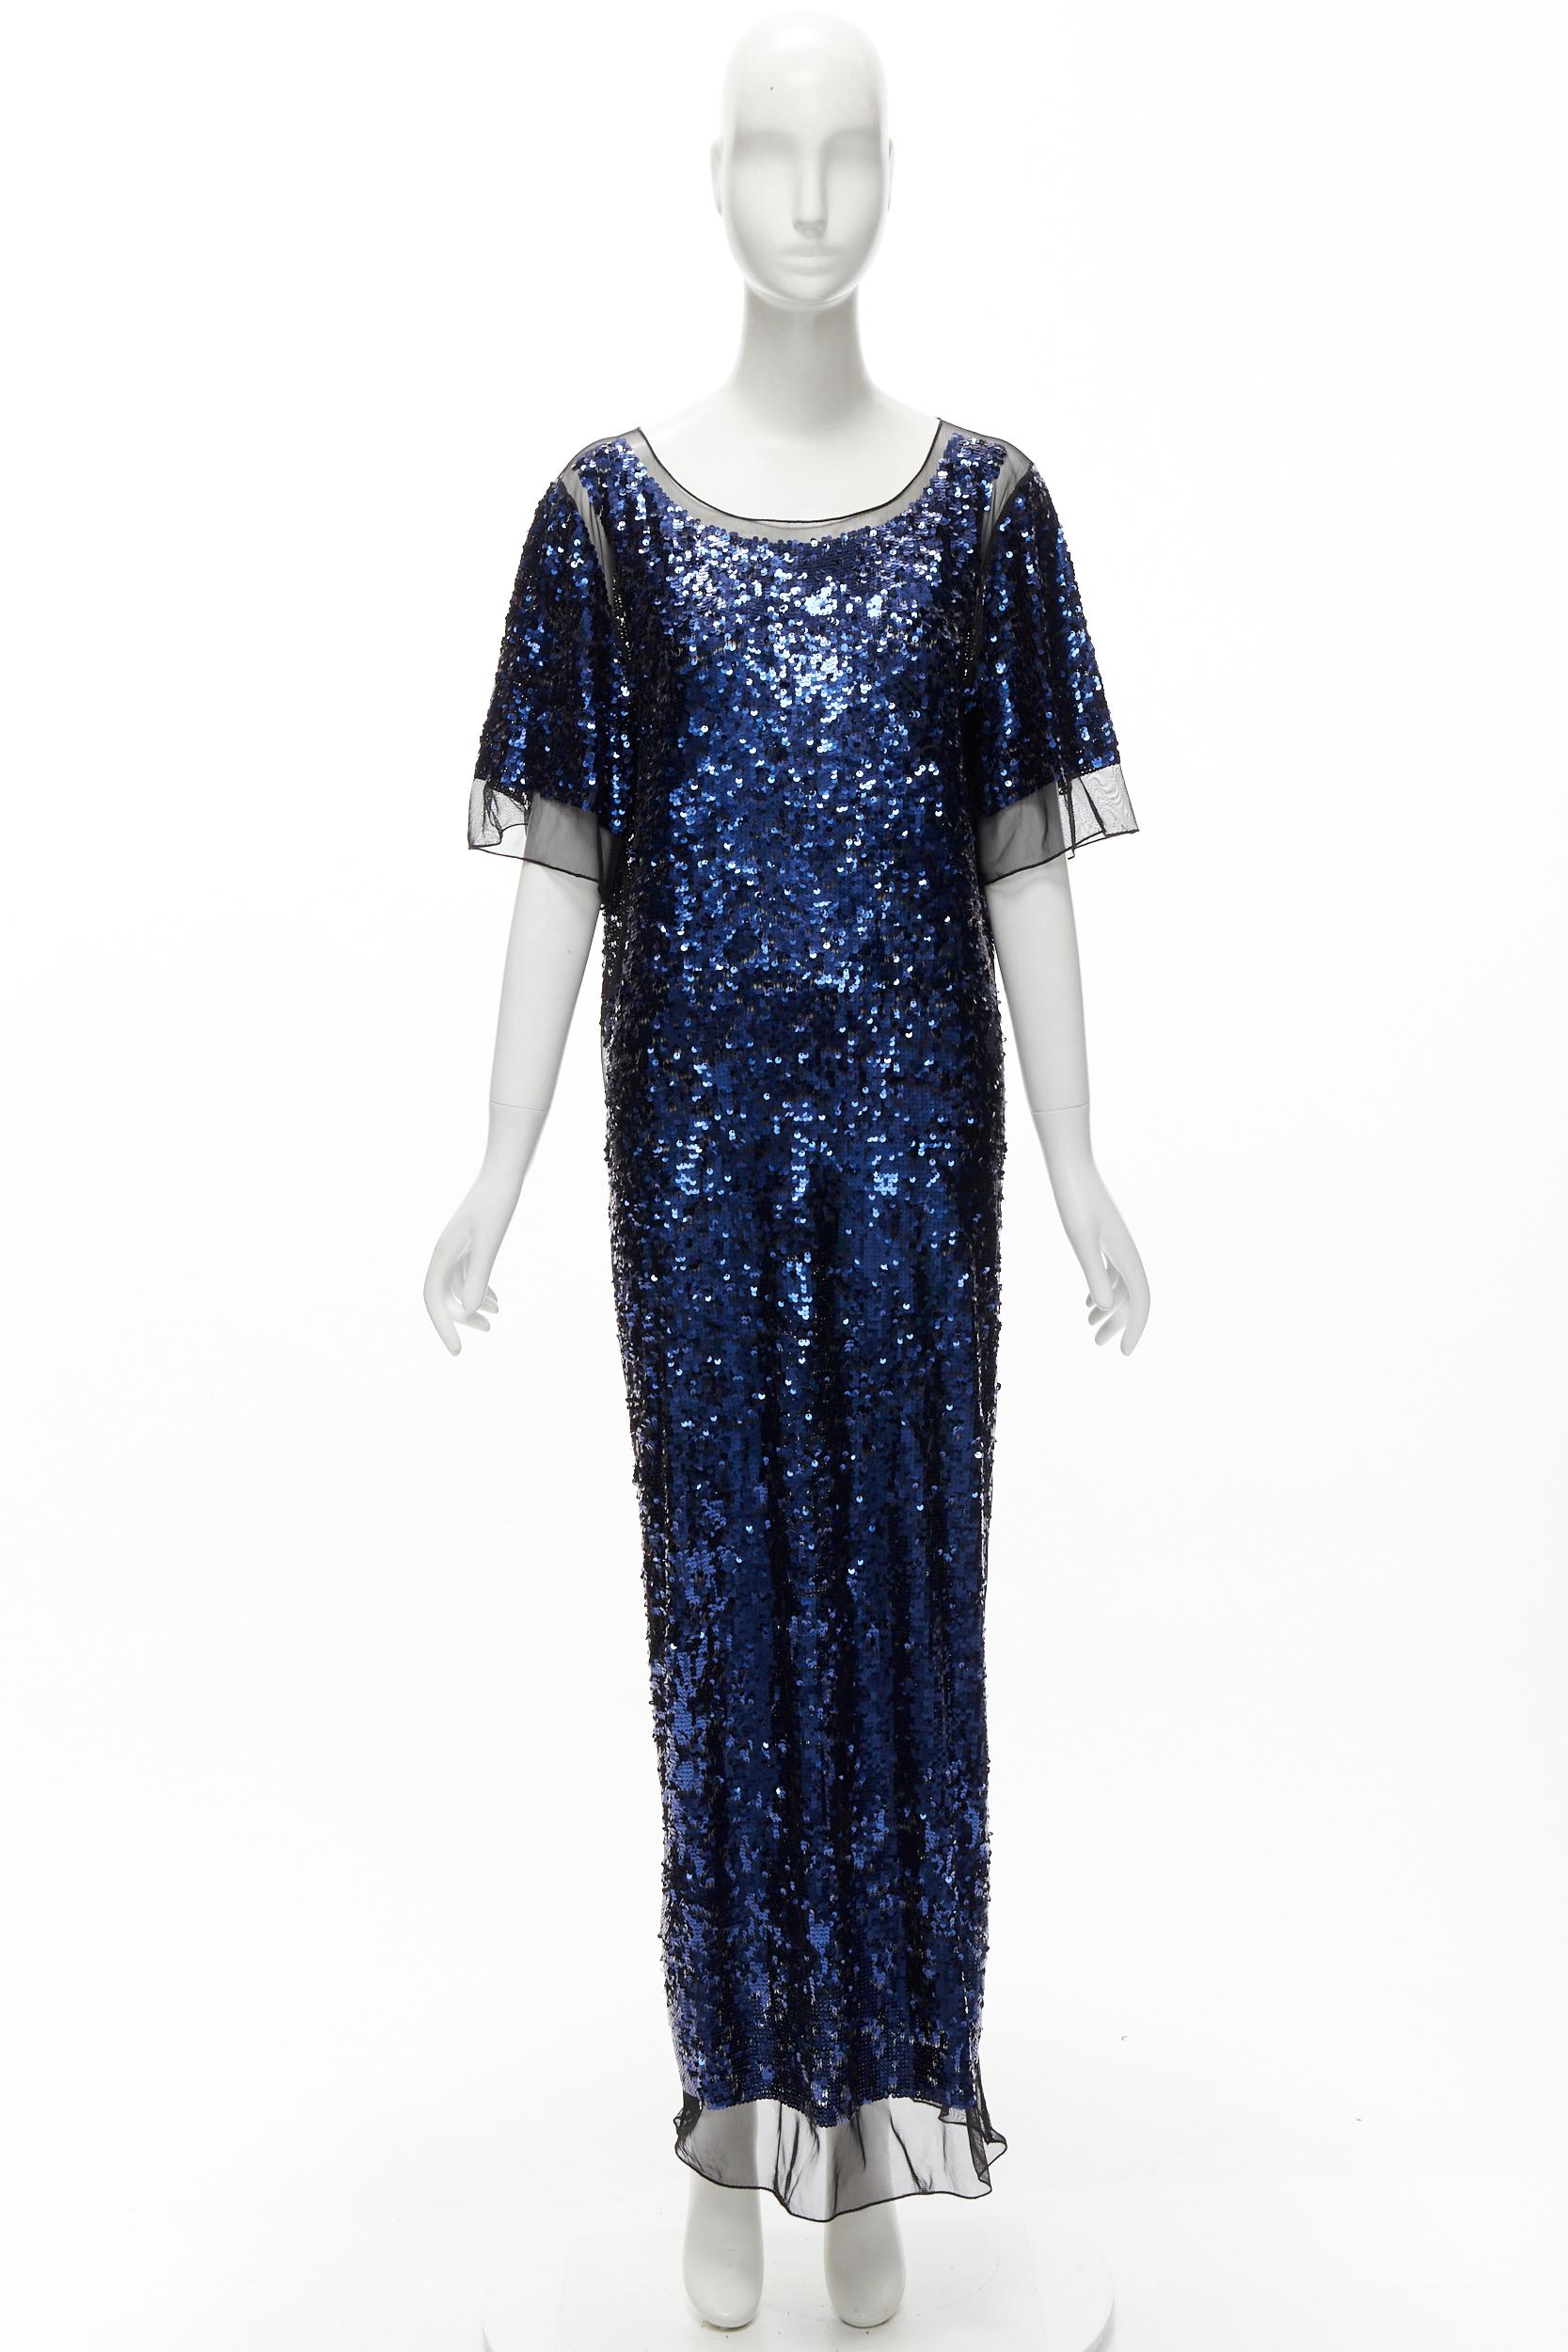 BY MALENE BIRGER blue sequins overlay black sheer evening gown dress M For Sale 6